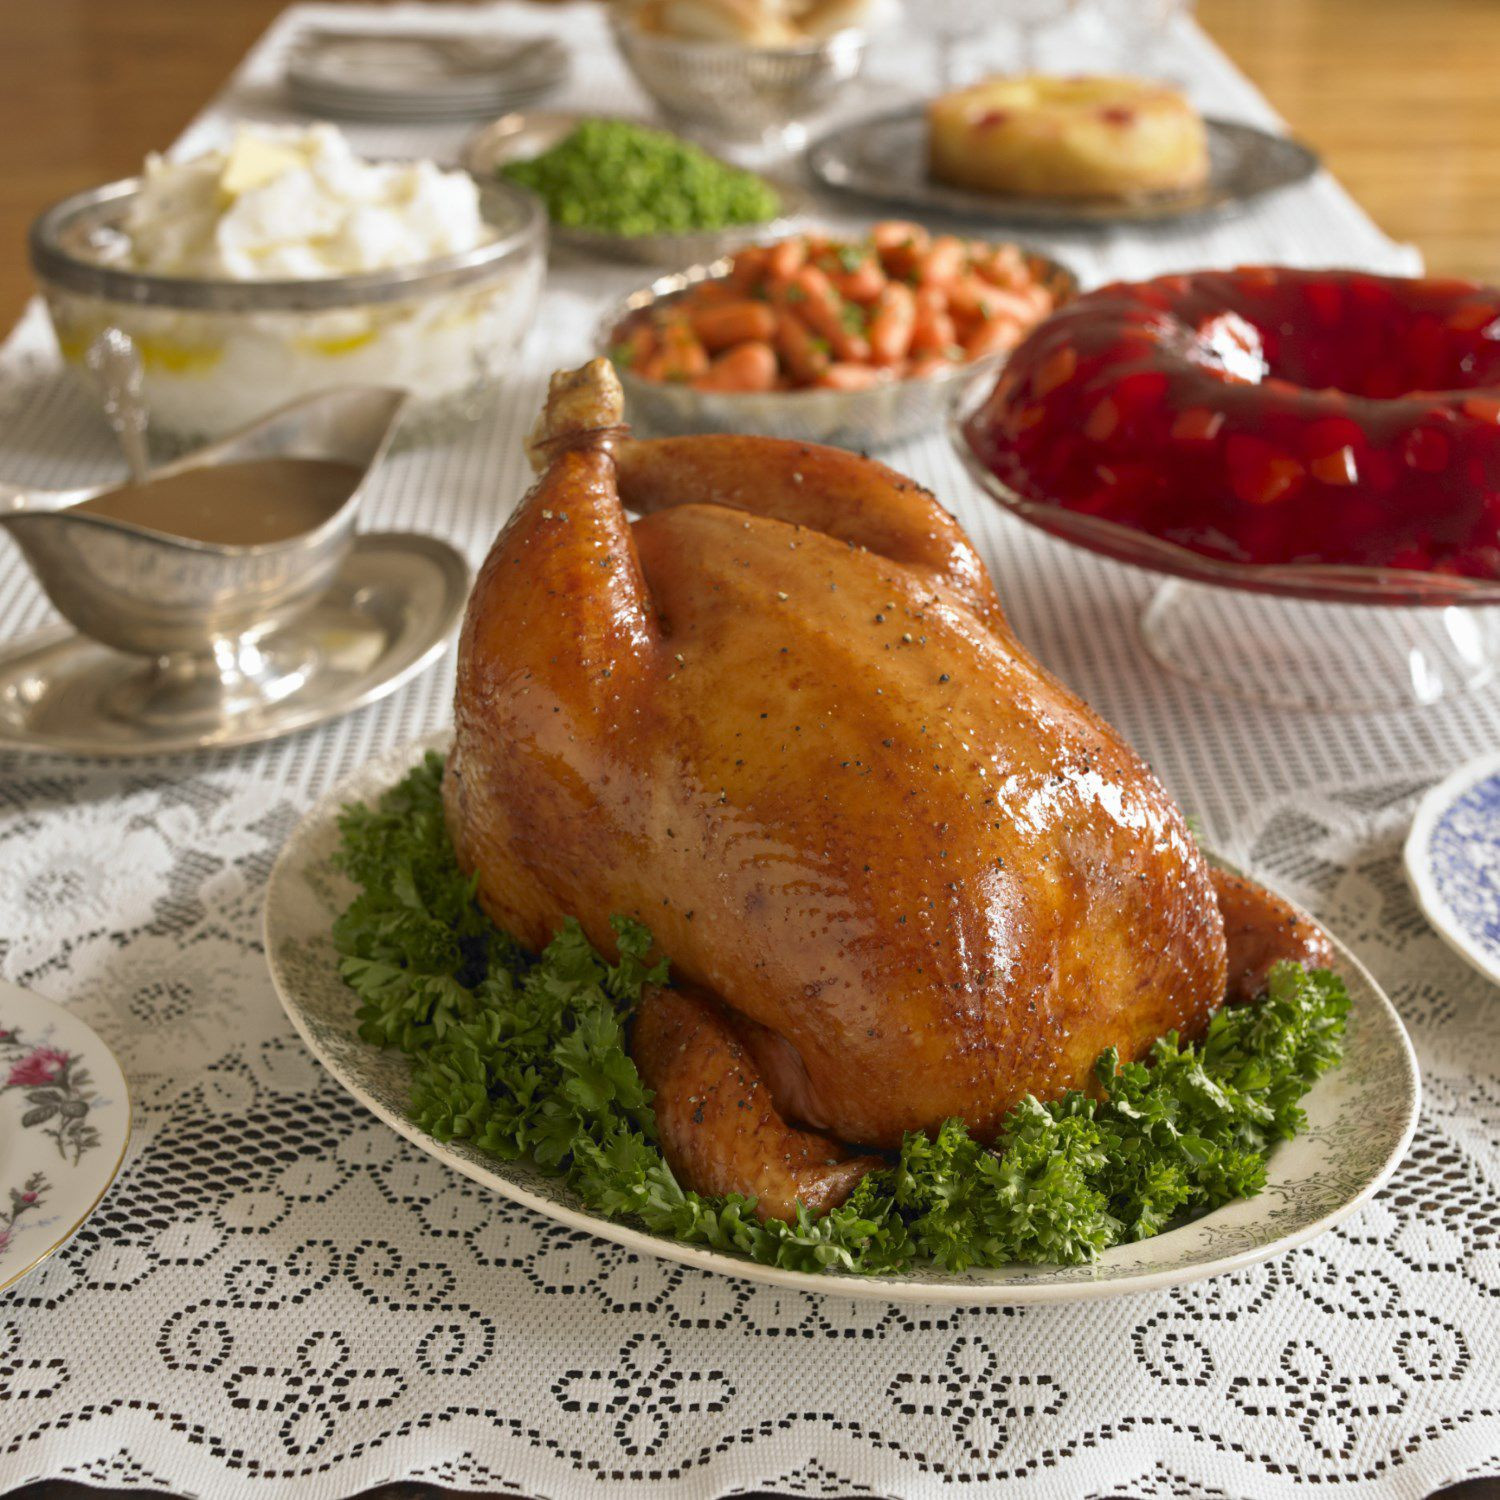 Top 21 Prepared Christmas Dinners to Go - Most Popular ...